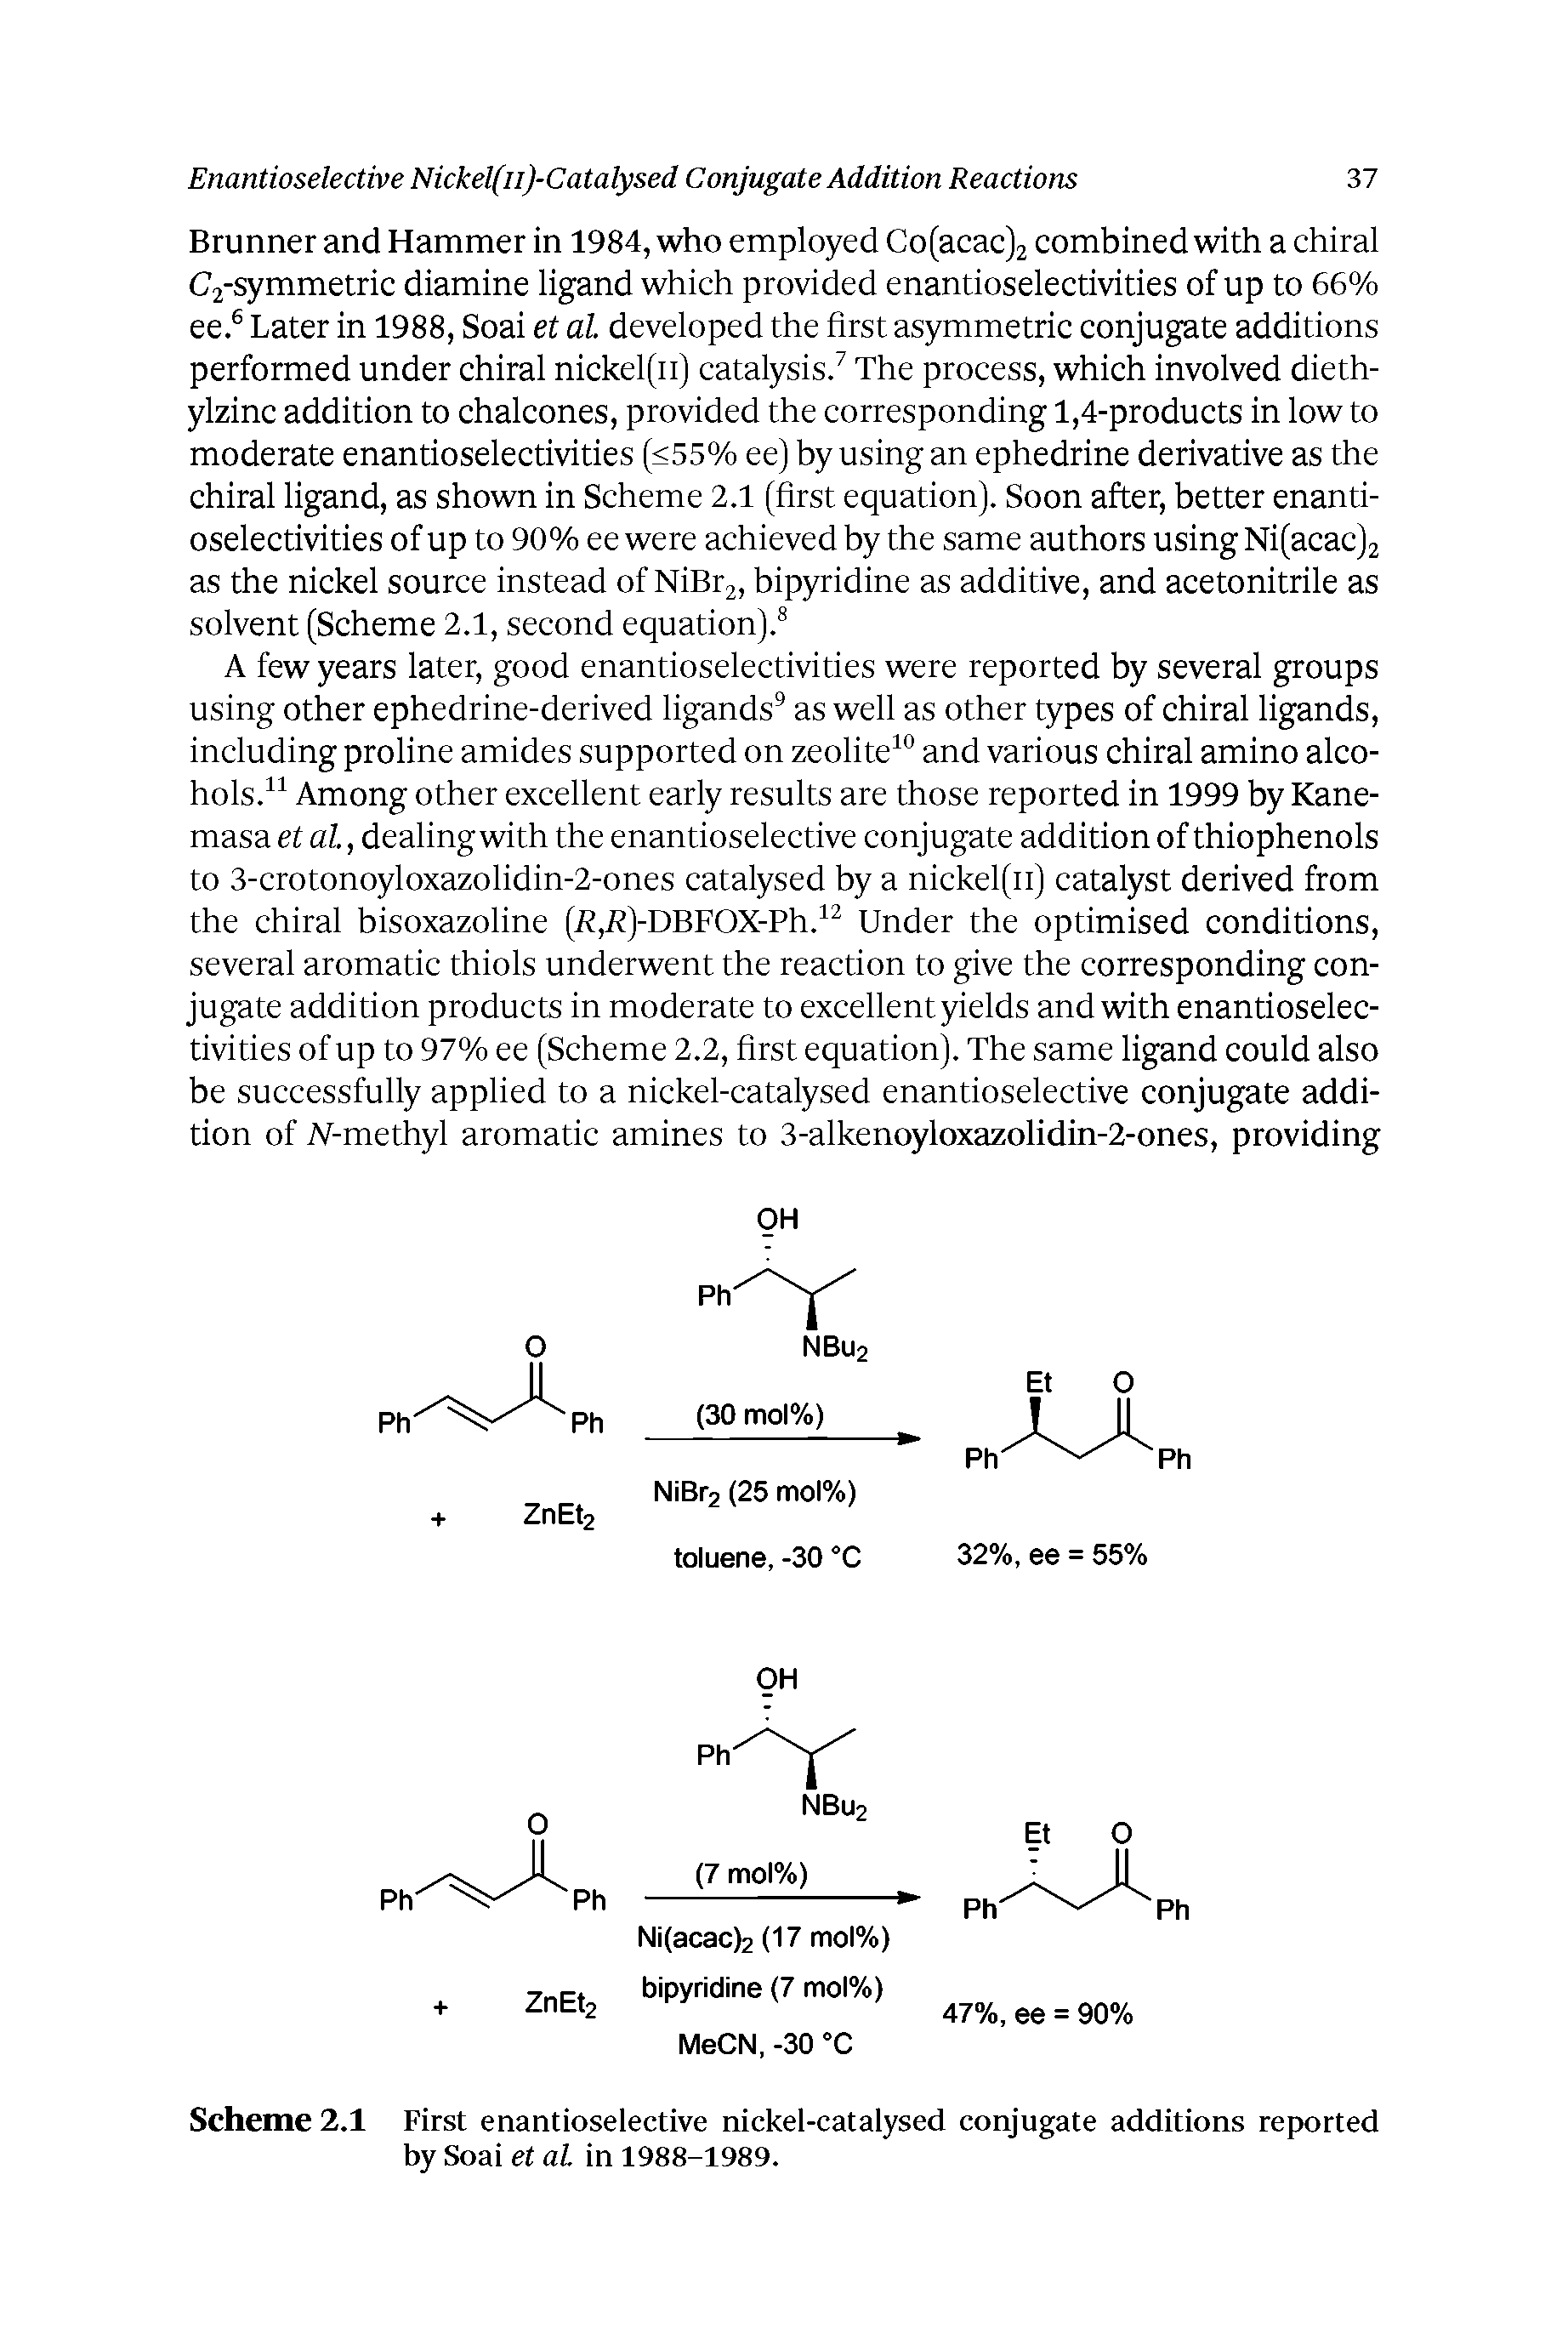 Scheme 2.1 First enantioselective nickel-catalysed conjugate additions reported by Soai et aL in 1988-1989.